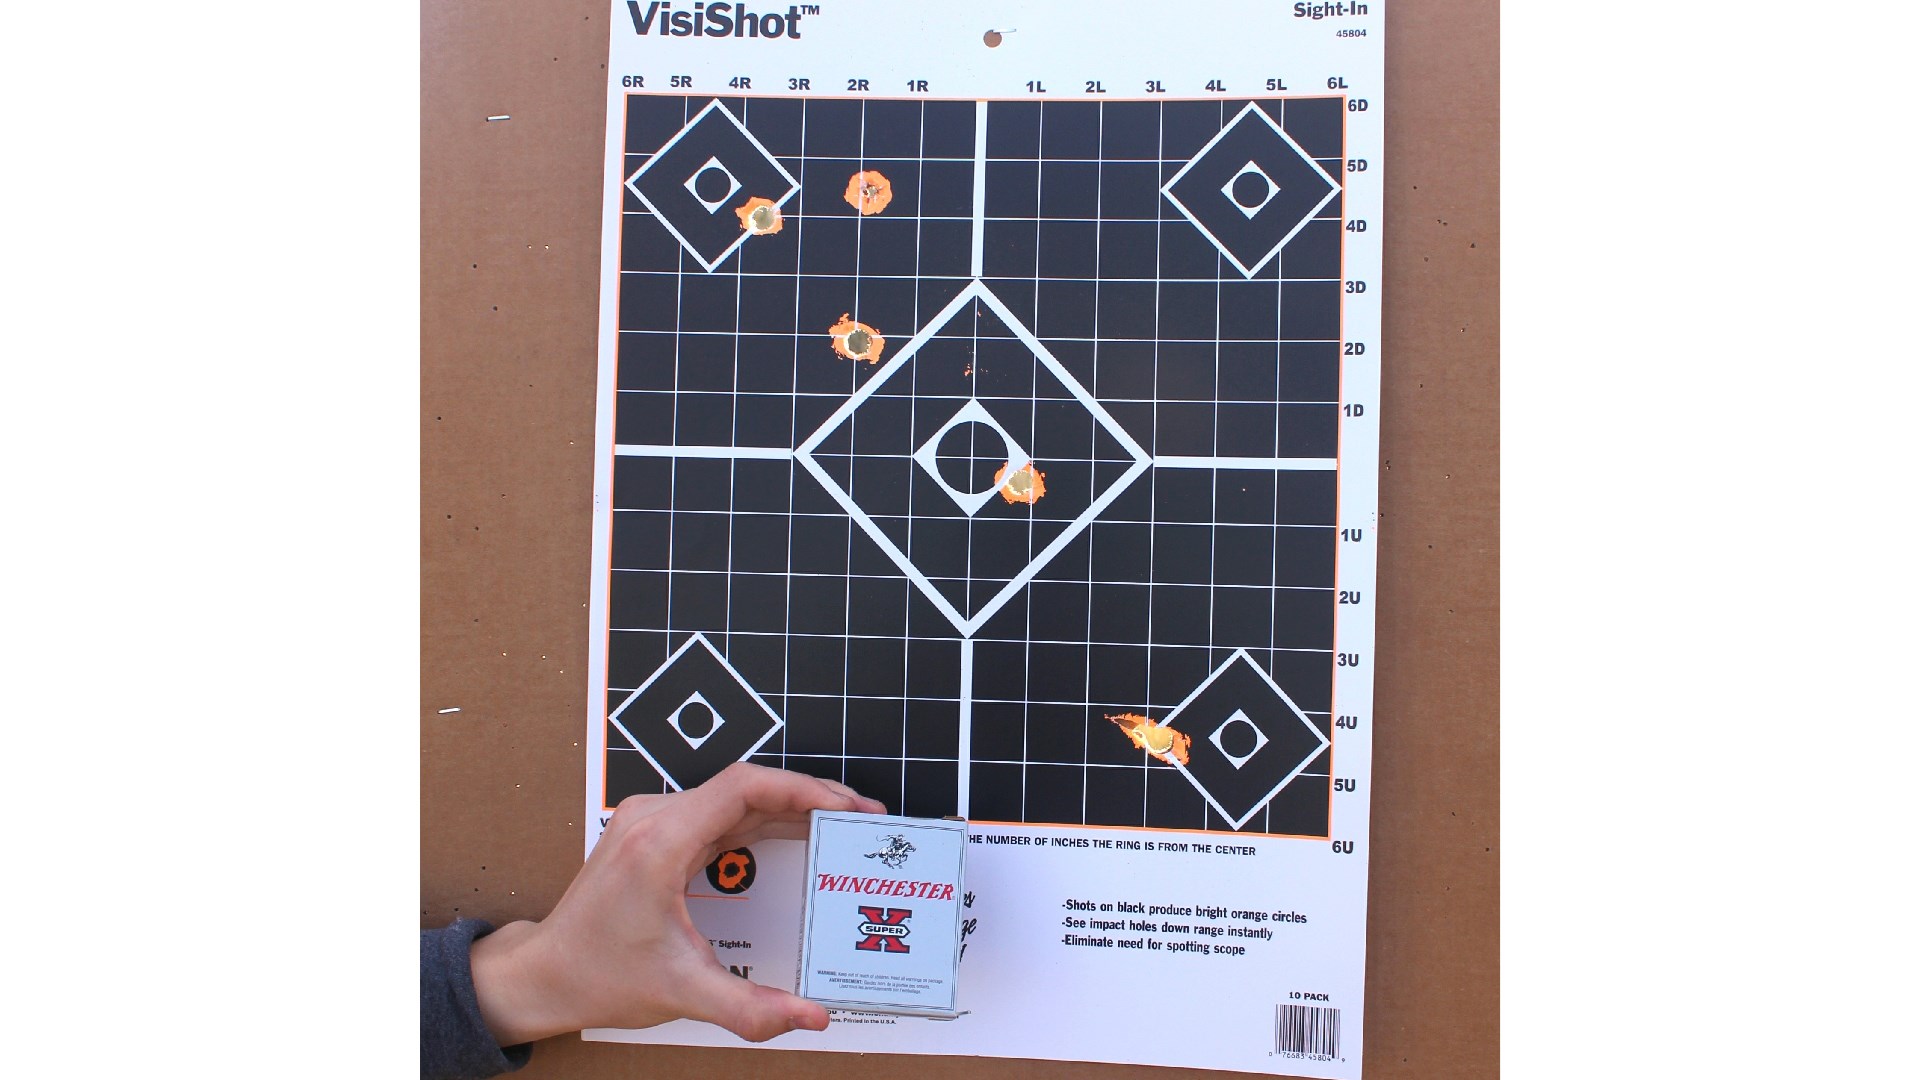 The five pellets of 000 buckshot came close to forming a diagonal line from the top left to the bottom right of the target area.